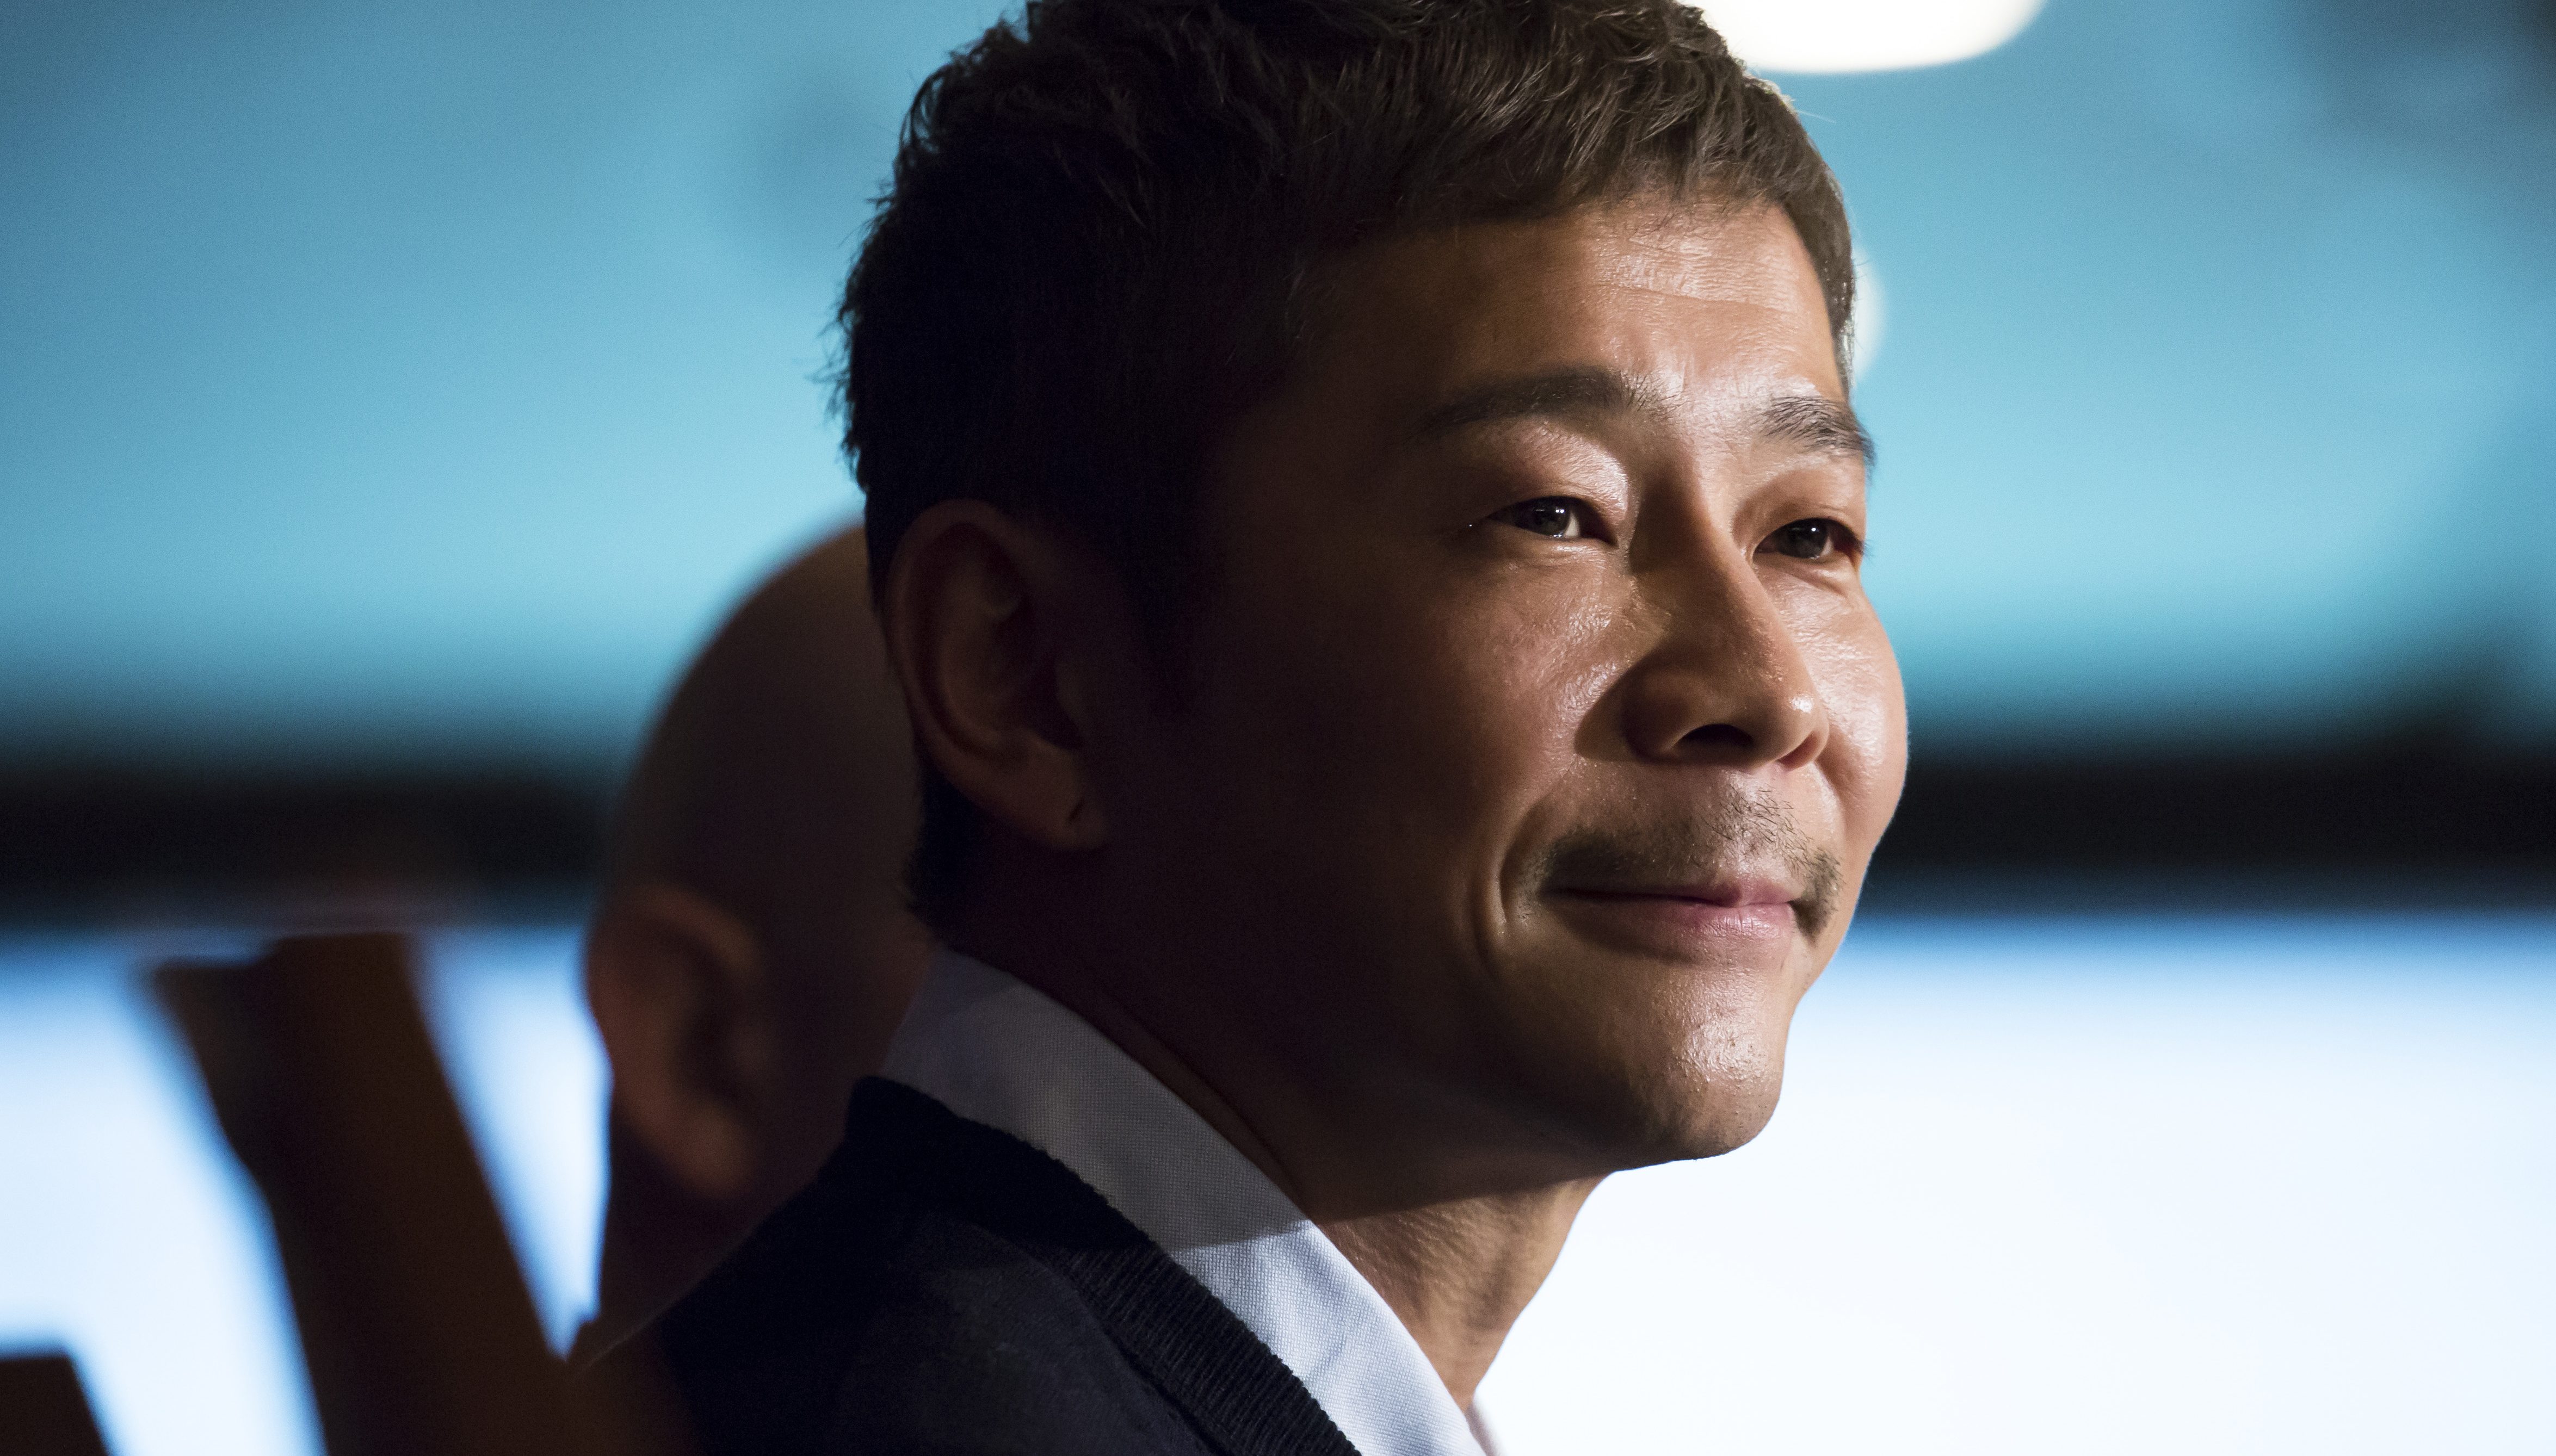 Yusaku Maezawa attends a news conference in Tokyo, Japan, on Oct. 9, 2018. (Tohomohiro Ohsumi—Bloomberg/Getty Images)